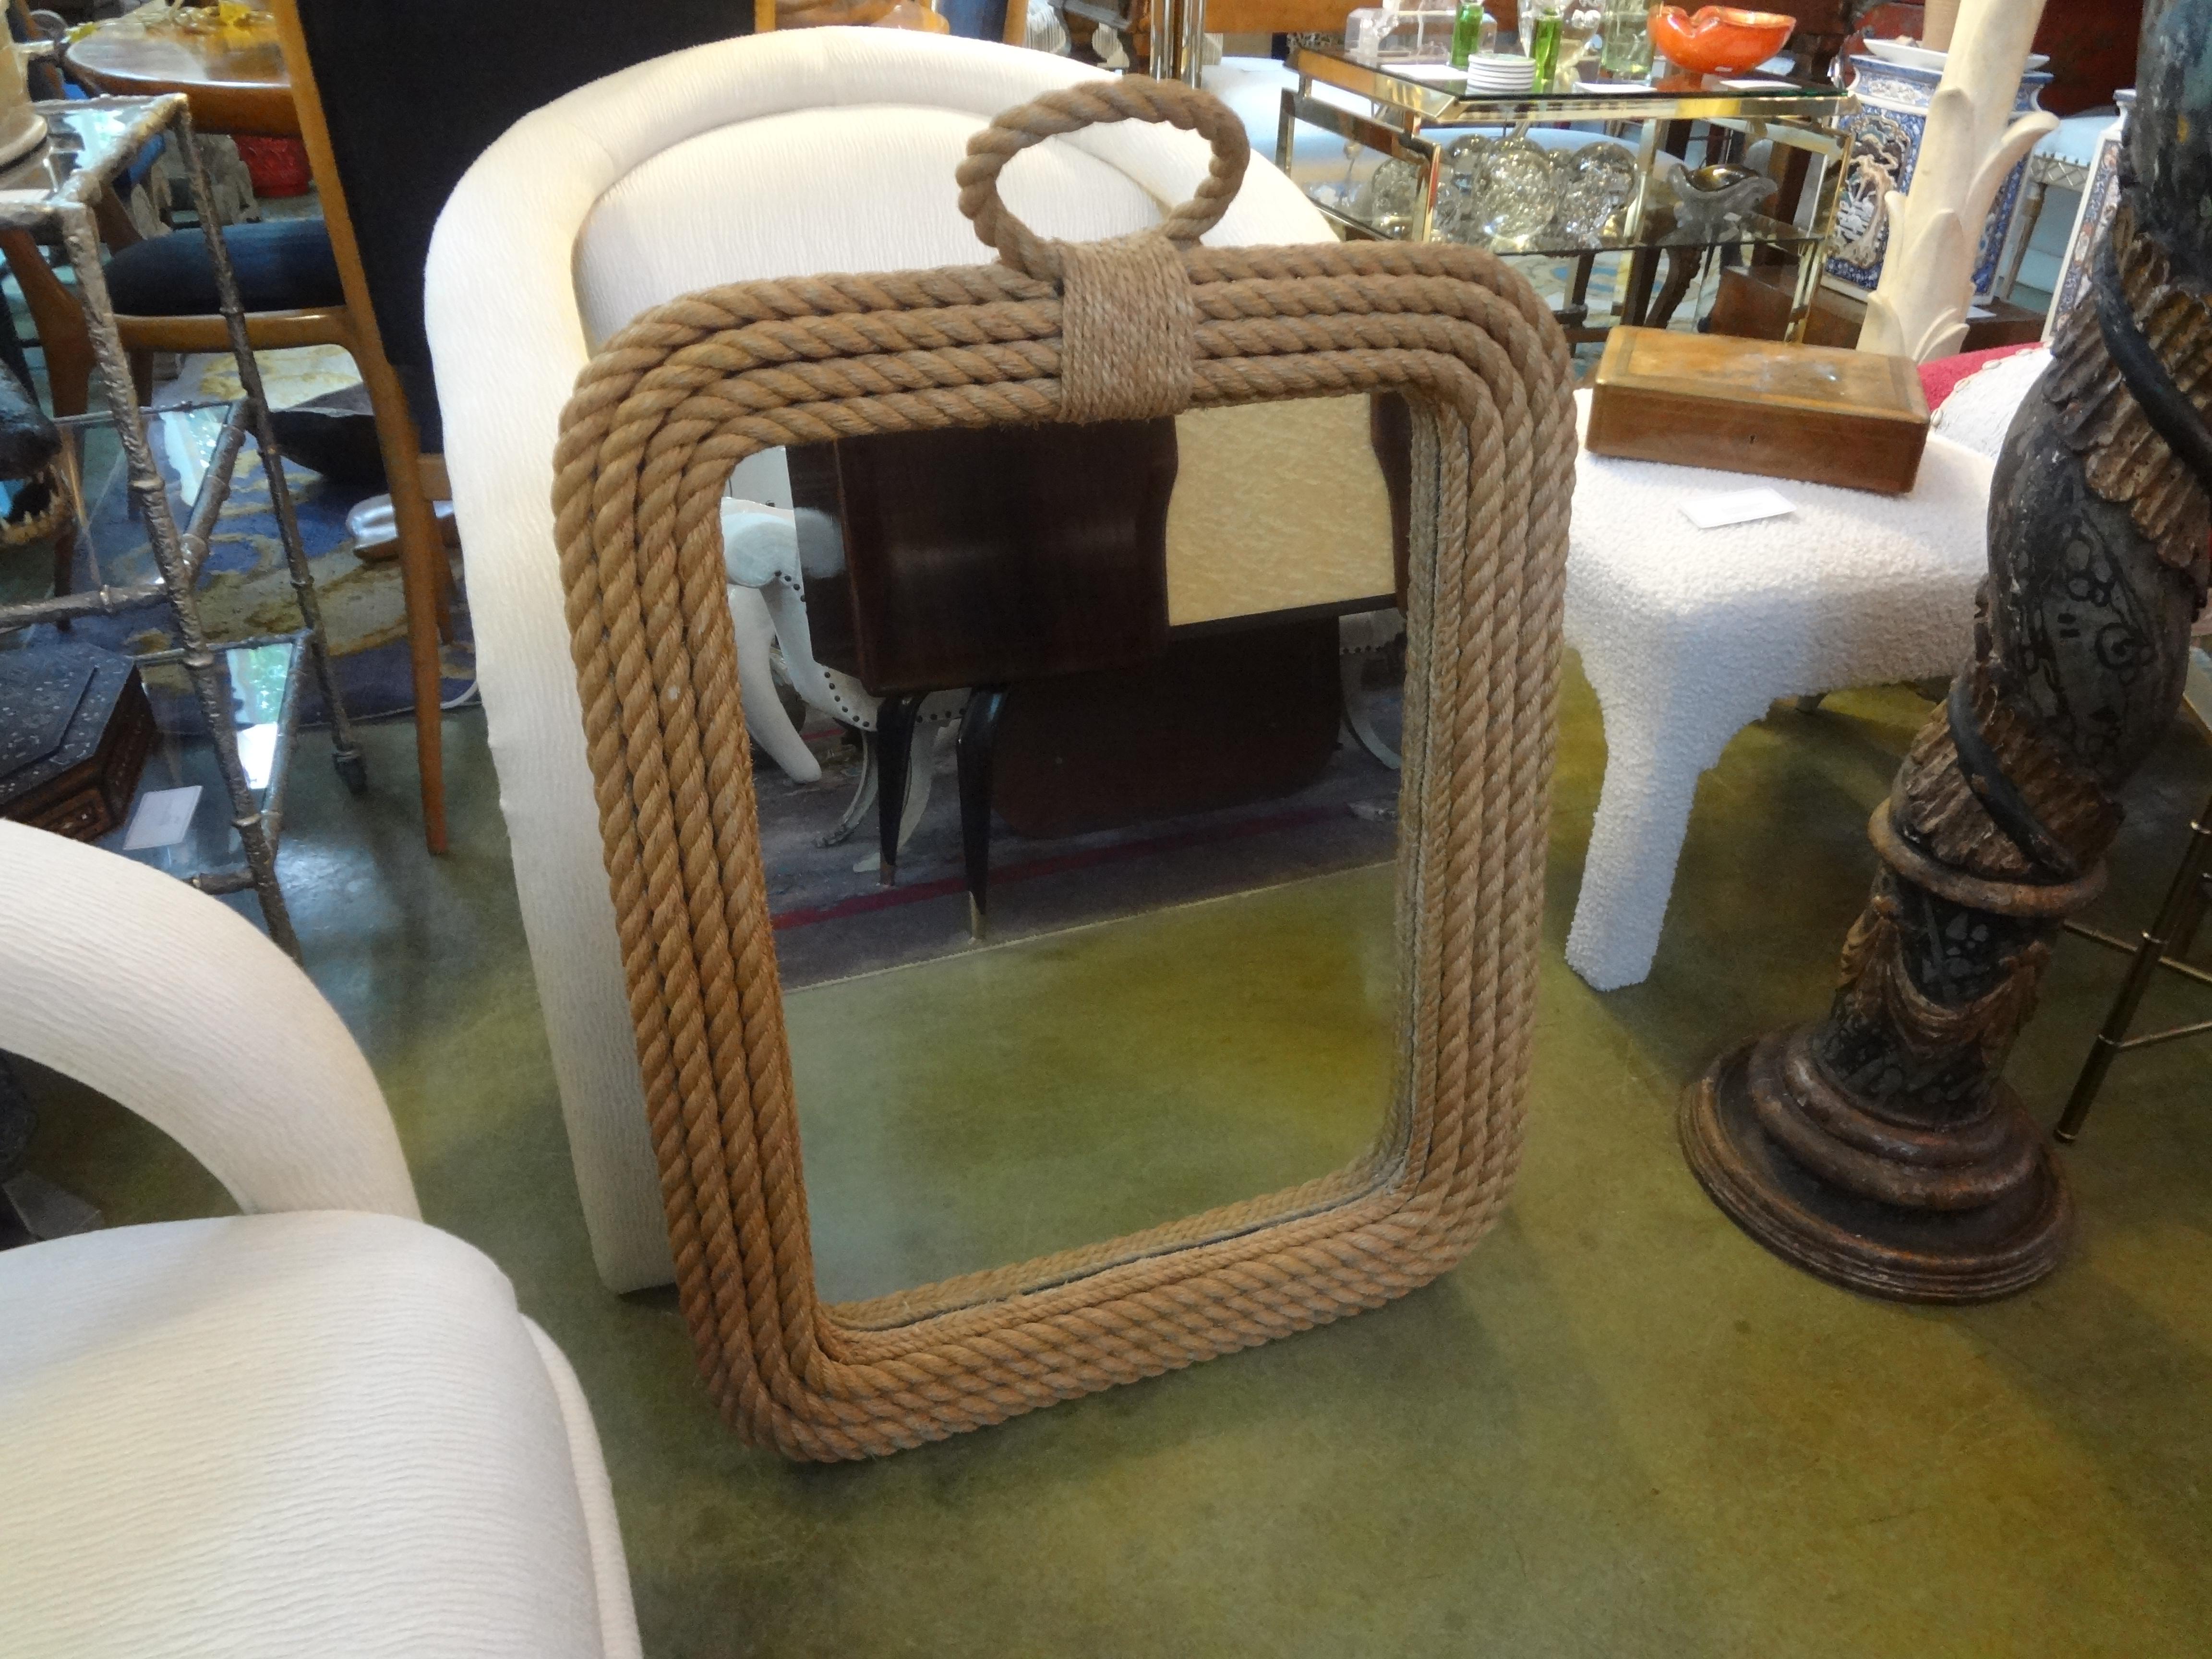 French organic modern rope mirror by Audoux & Minet. This stunning French mid-century rope mirror by Adrien Audoux and Frida Minet shows the Artistry of this outstanding Design team.